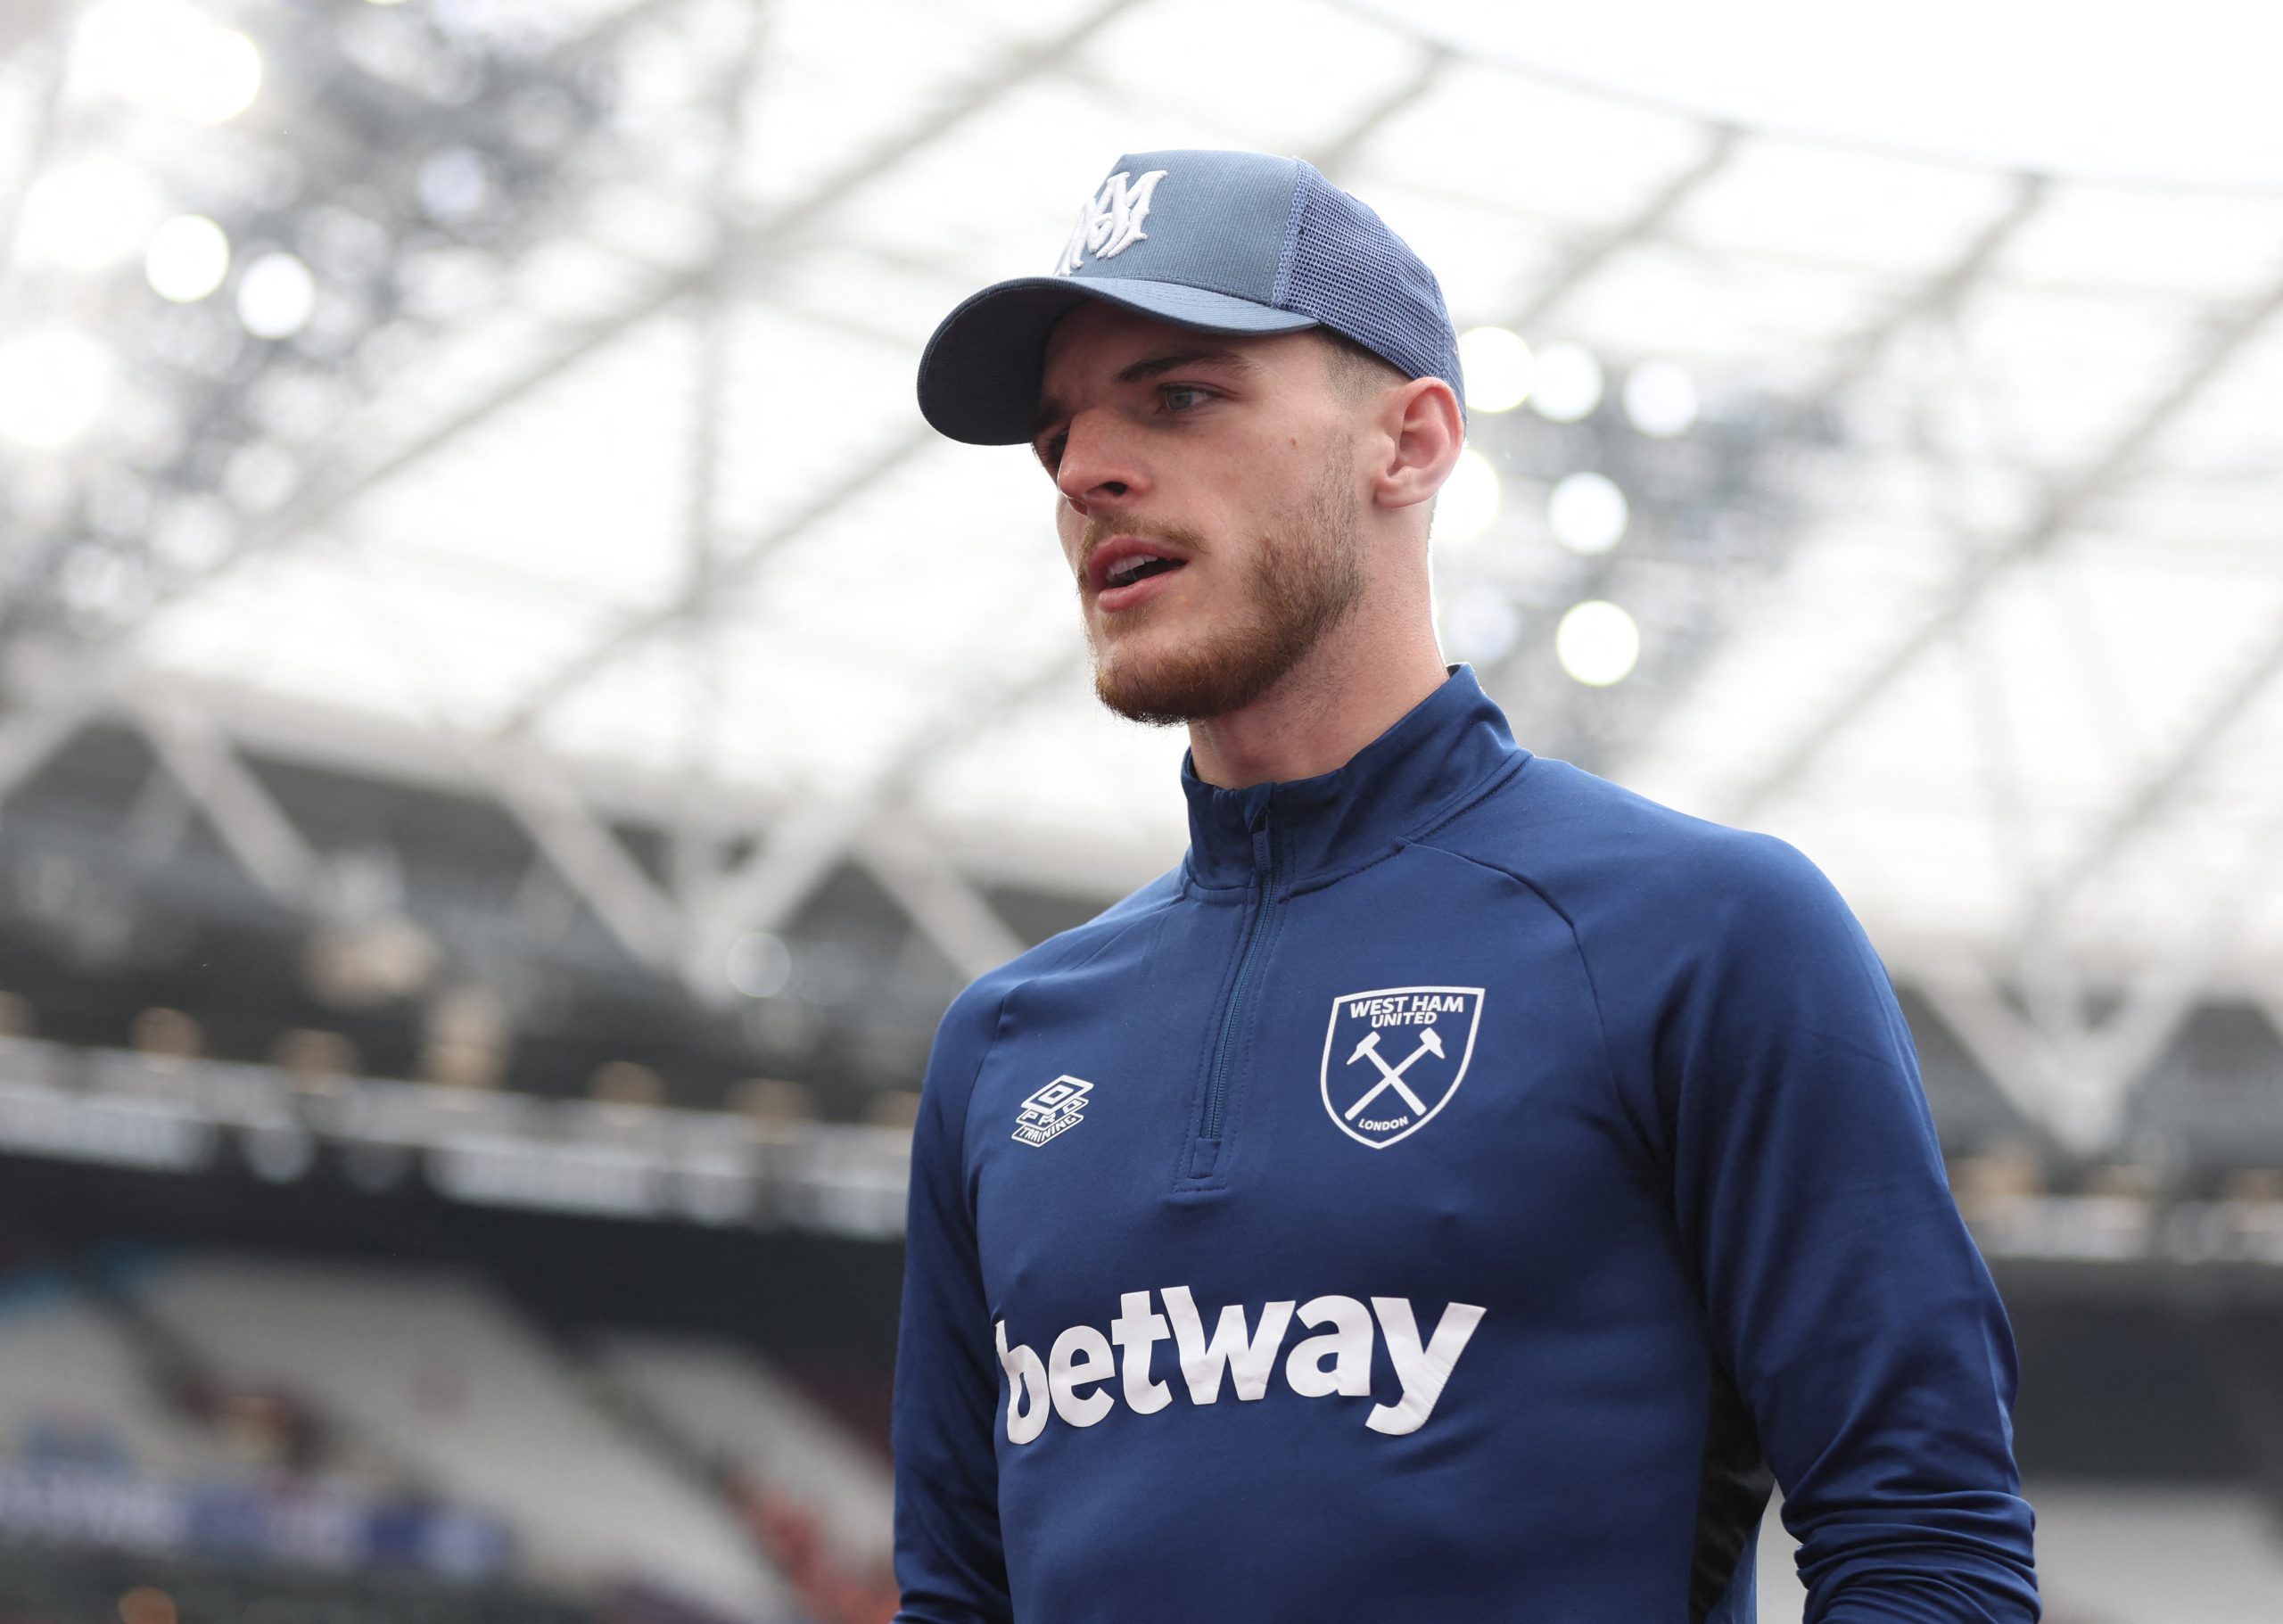 declan-rice-west-ham-united-man-united-transfer-news-erik-ten-hag-latest-manchester-united-premier-league-mark-ogden-goldbridge-united-standSoccer Football - Premier League - West Ham United v Manchester City - London Stadium, London, Britain - May 15, 2022 West Ham United's Declan Rice before the match Action Images via Reuters/Matthew Childs EDITORIAL USE ONLY. No use with unauthorized audio, video, data, fixture lists, club/league logos or 'live' services. Online in-match use limited to 75 im